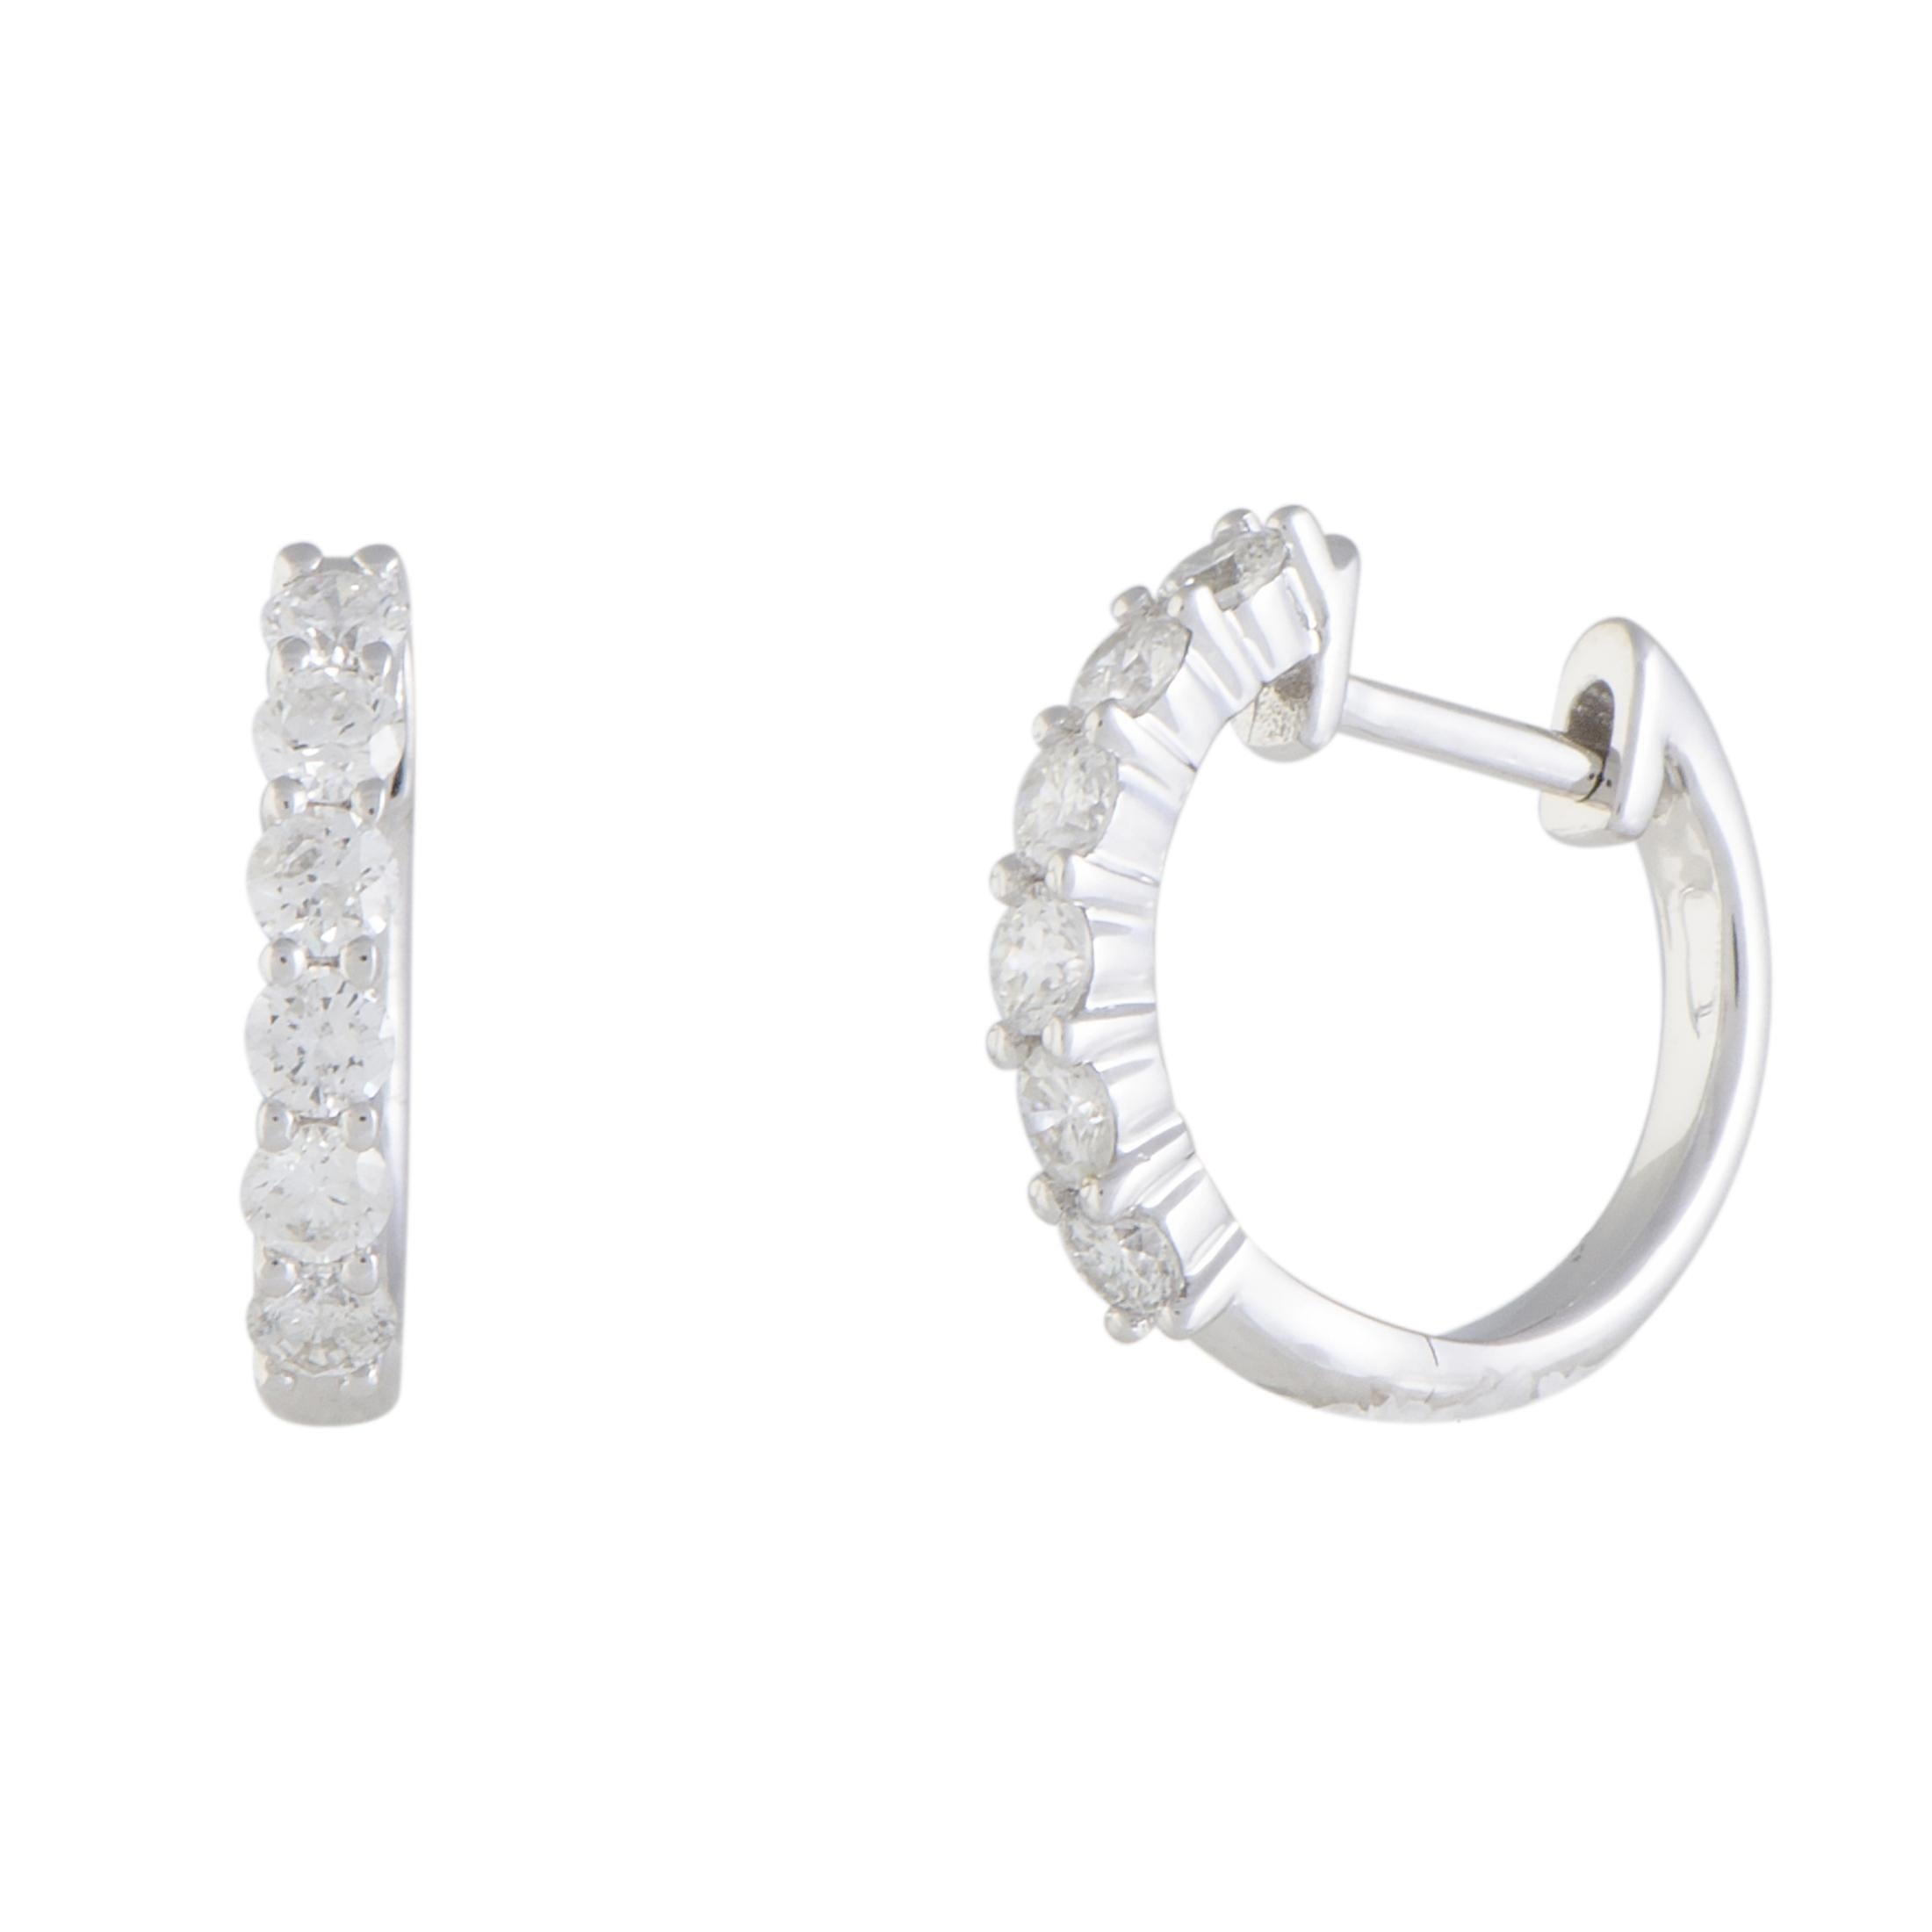 LB Exclusive 14K White Gold 0.75 Ct Diamond Hoop Earrings In New Condition For Sale In Southampton, PA